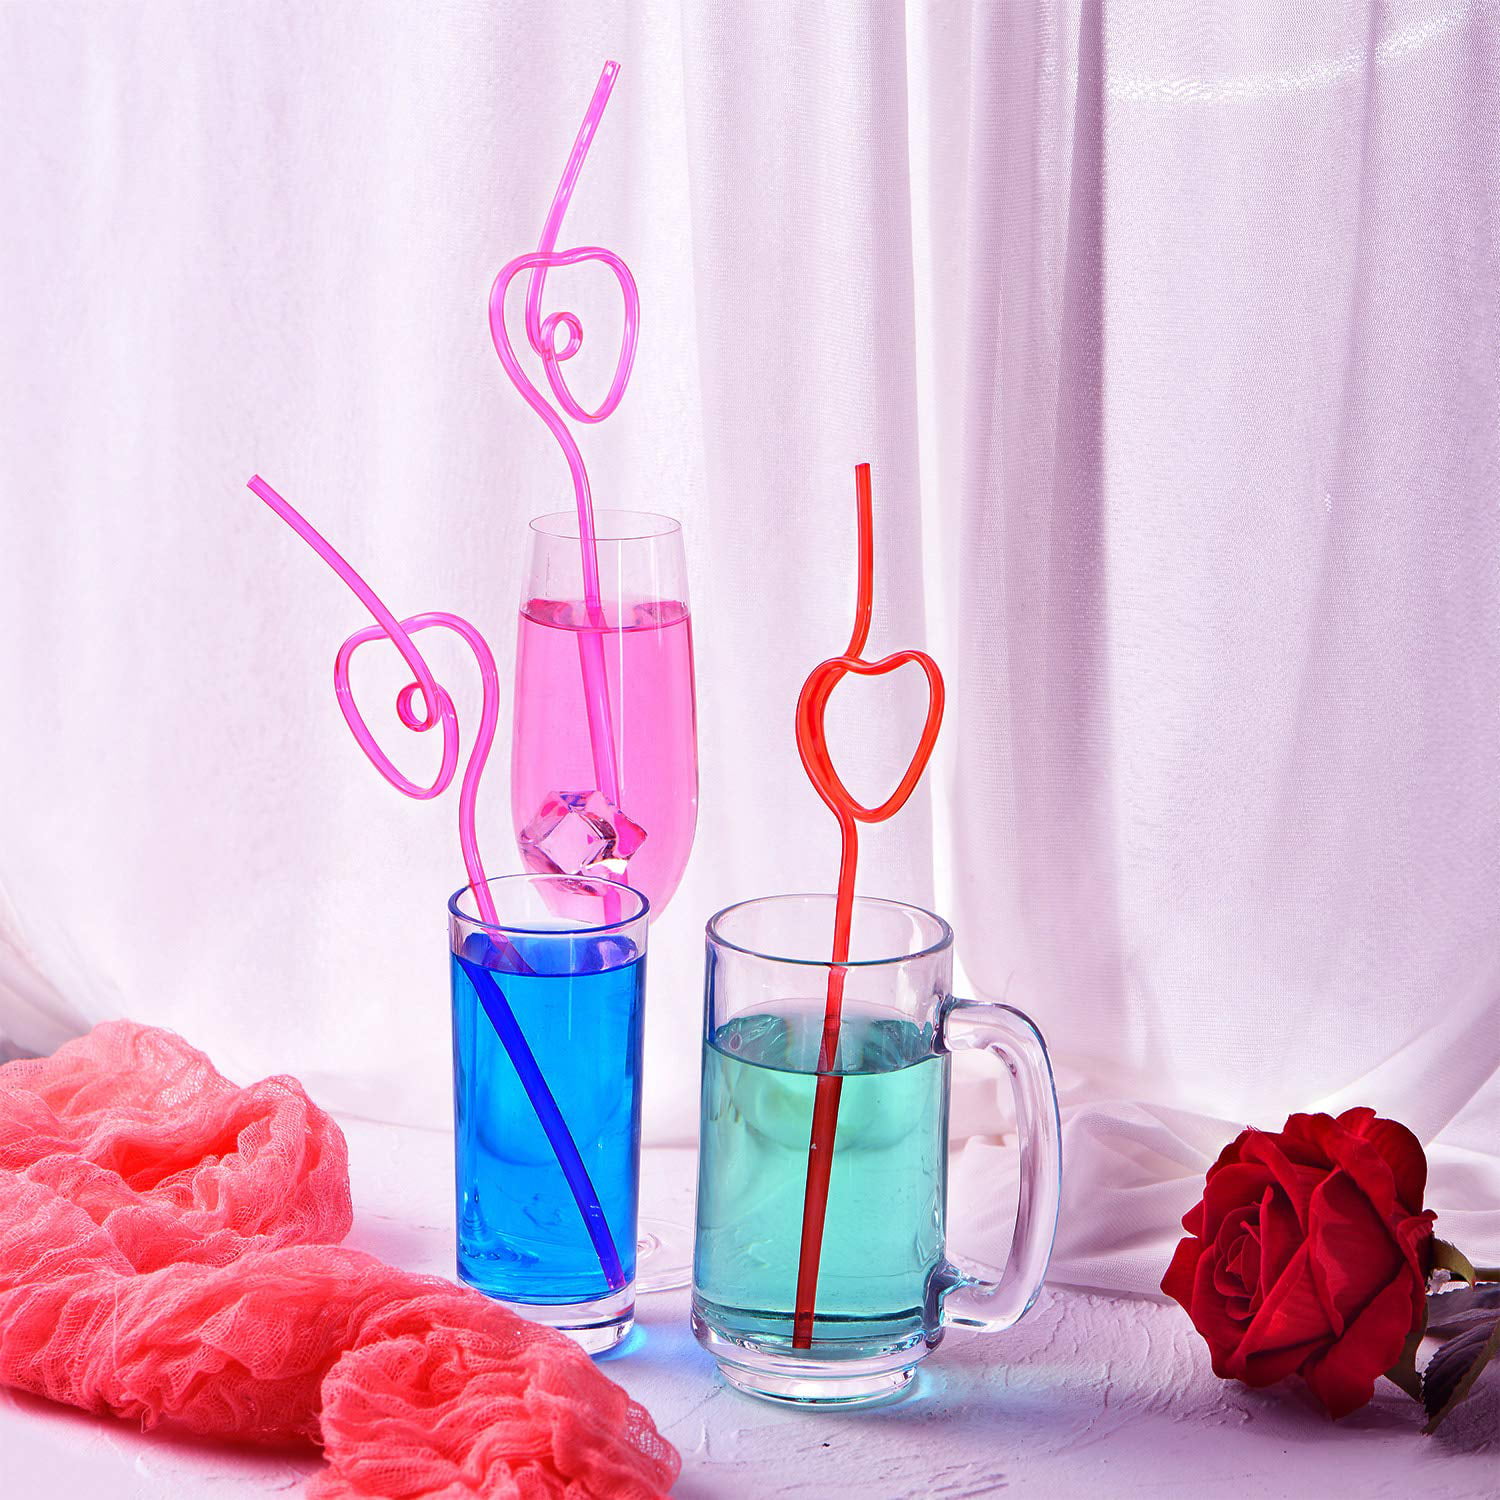 Red Heart Shaped Plastic Silly Straw - 10.25 x 3 (Pack of 1) - Reusable &  Durable Drinkware Accessory, Perfect for Valentines, Birthdays, Parties